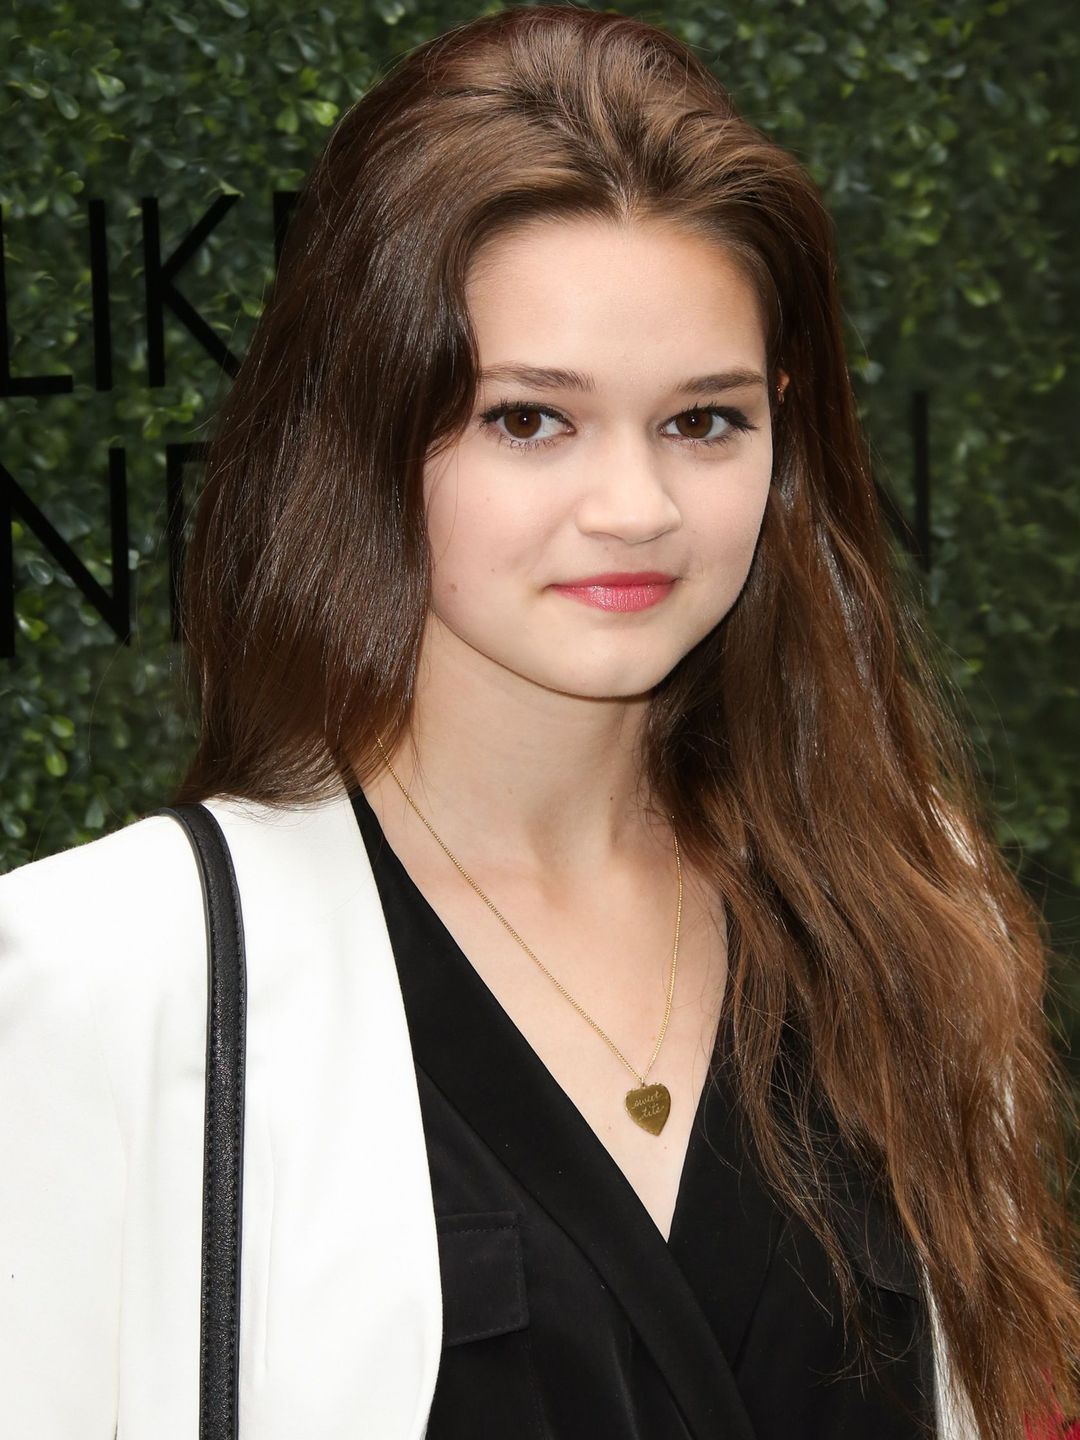 Ciara Bravo who is her mother